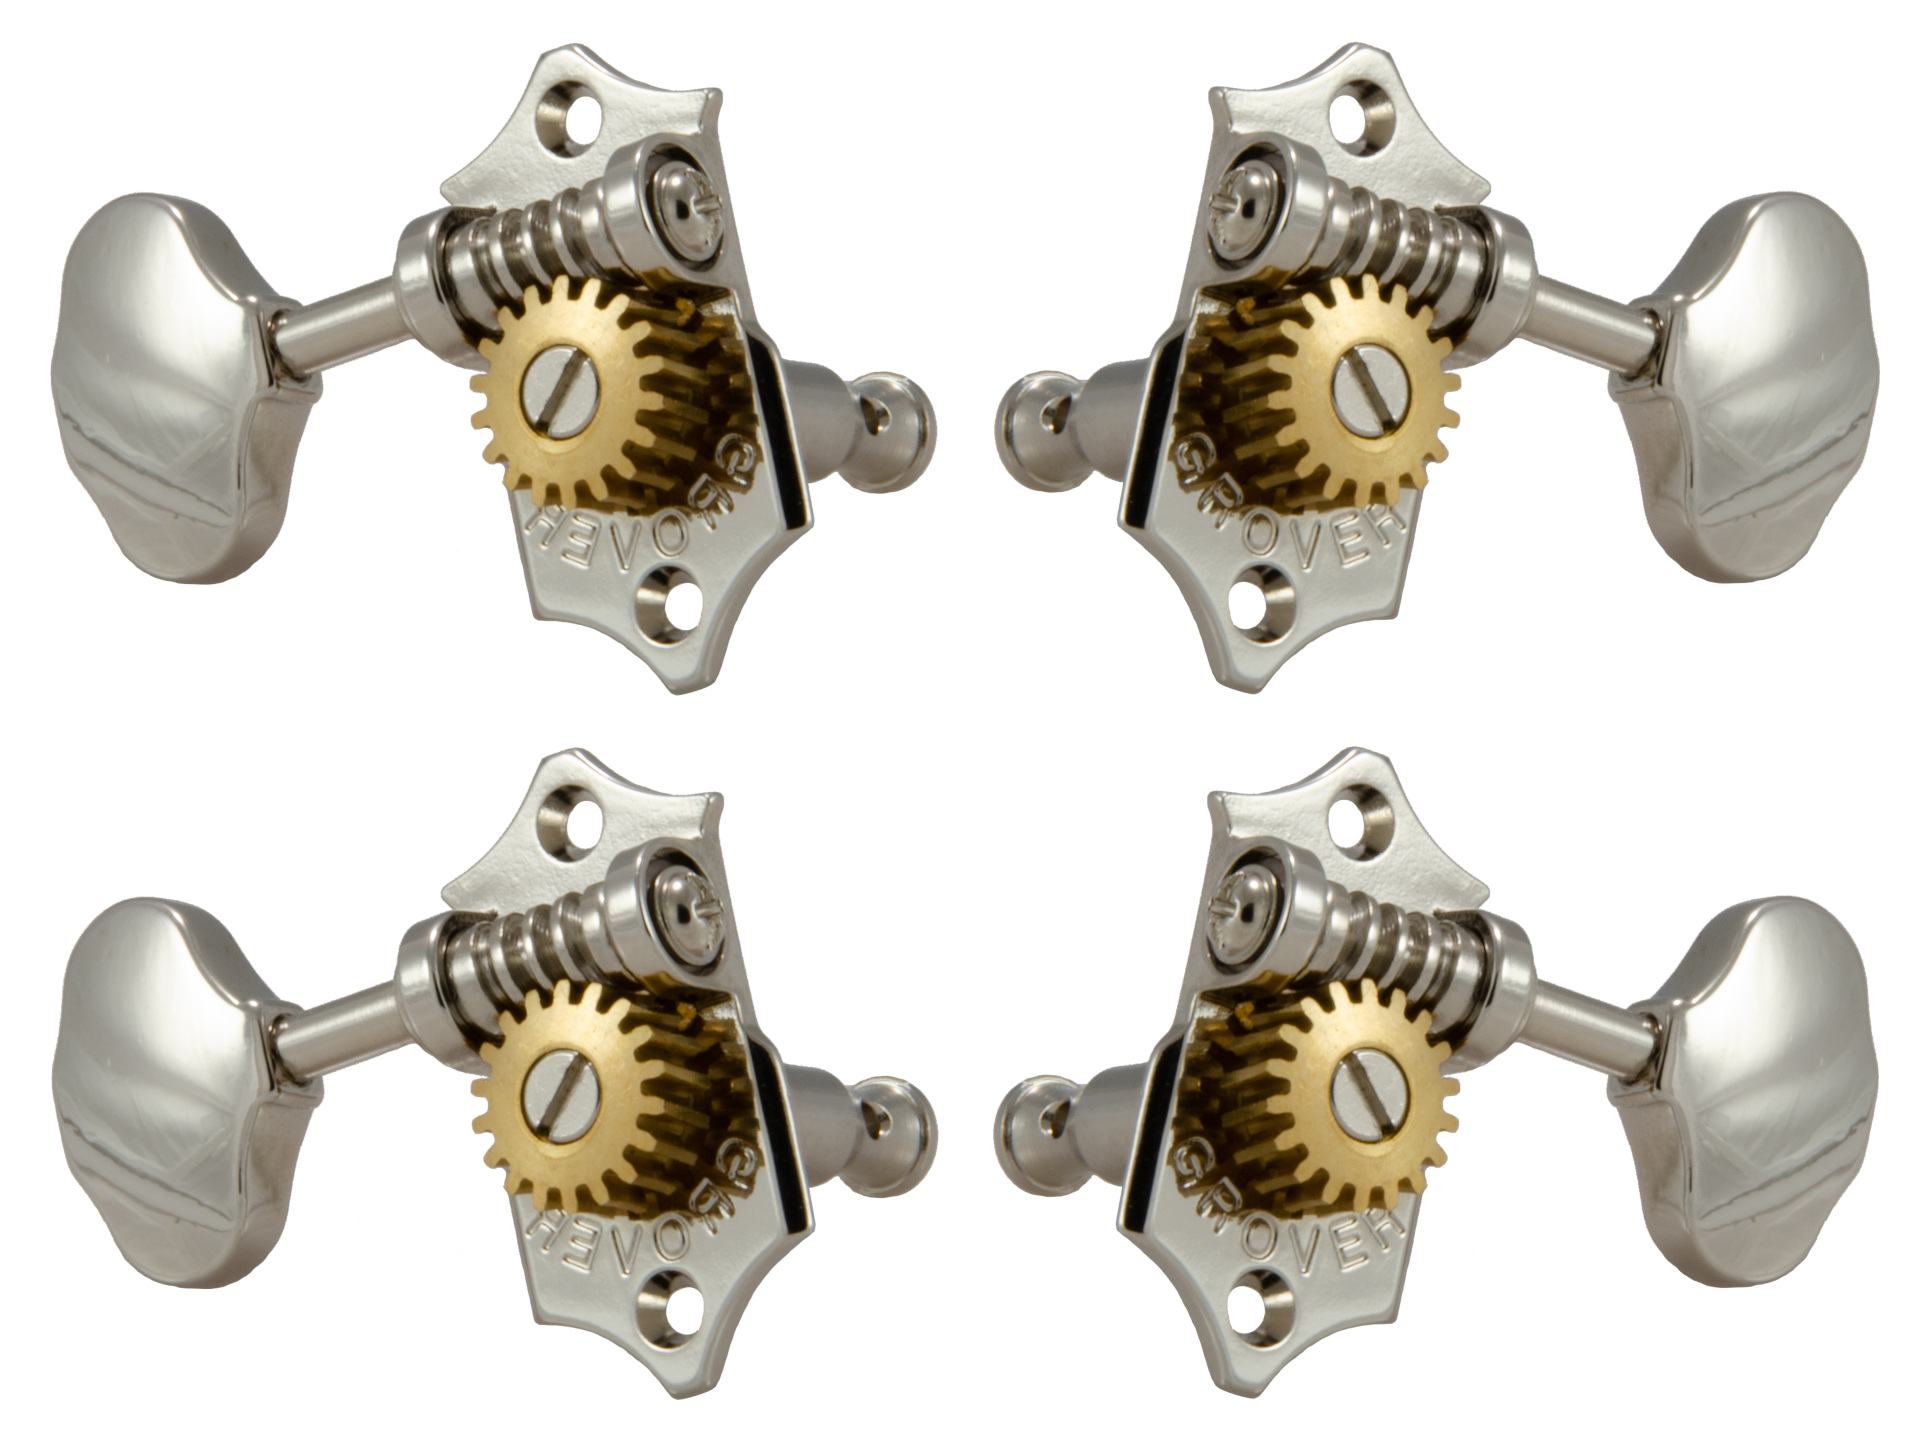 Grover U99-18N Sta-Tite Geared Ukulele Pegs with Metal Button, 21 mm Post - 4 pcs. - Nickel